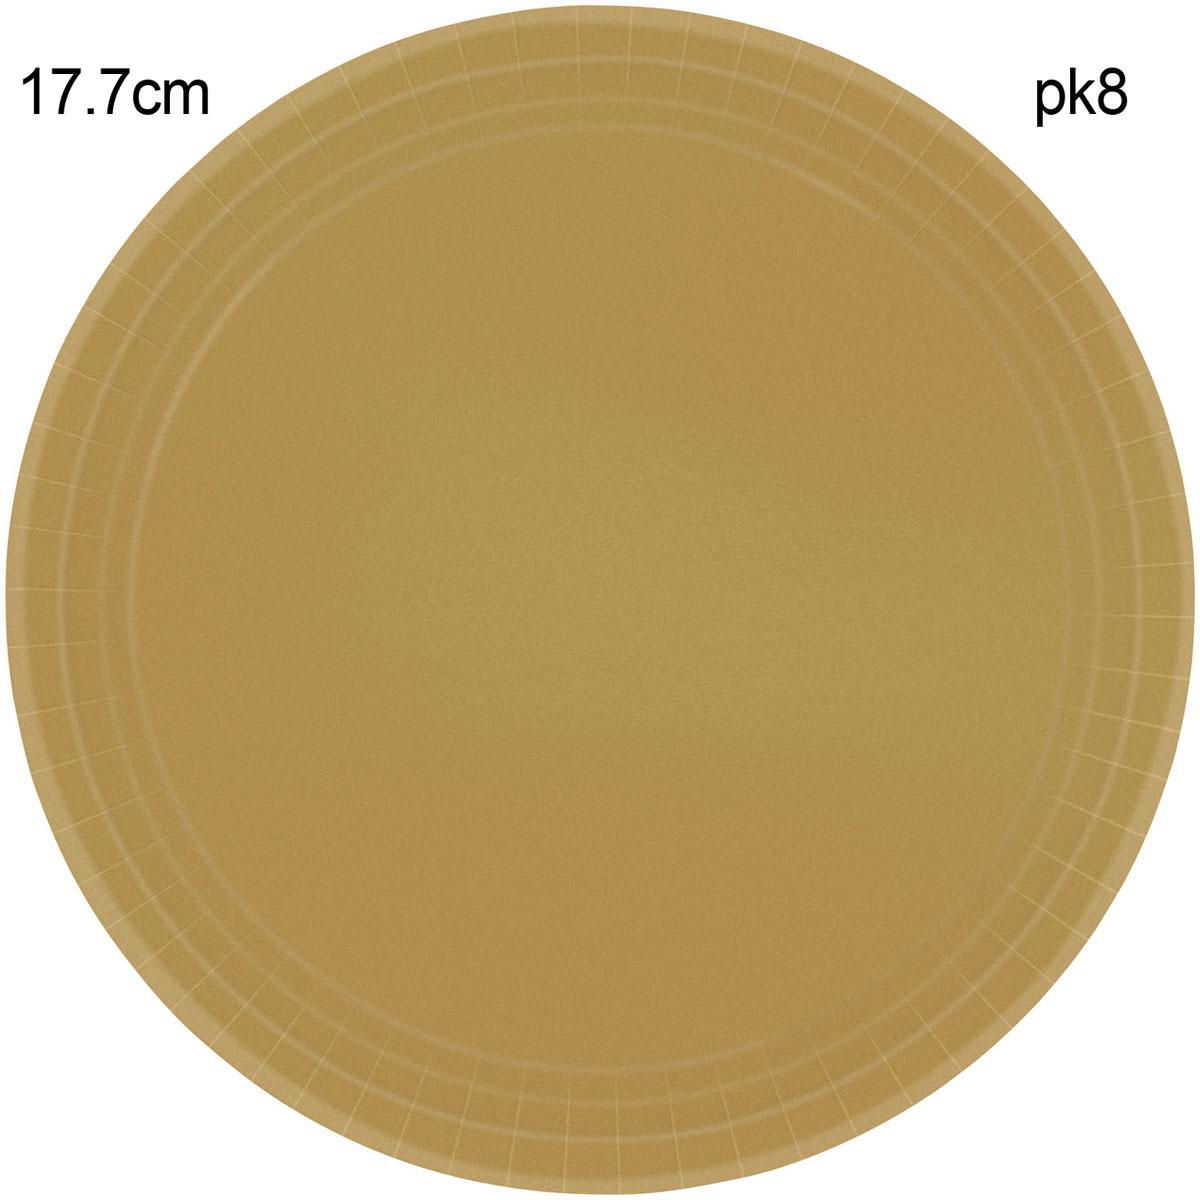 Pack 8 Gold 18cm Paper Dessert Plates by Amscan 54015-19 available here at Karnival Costumes online party shop